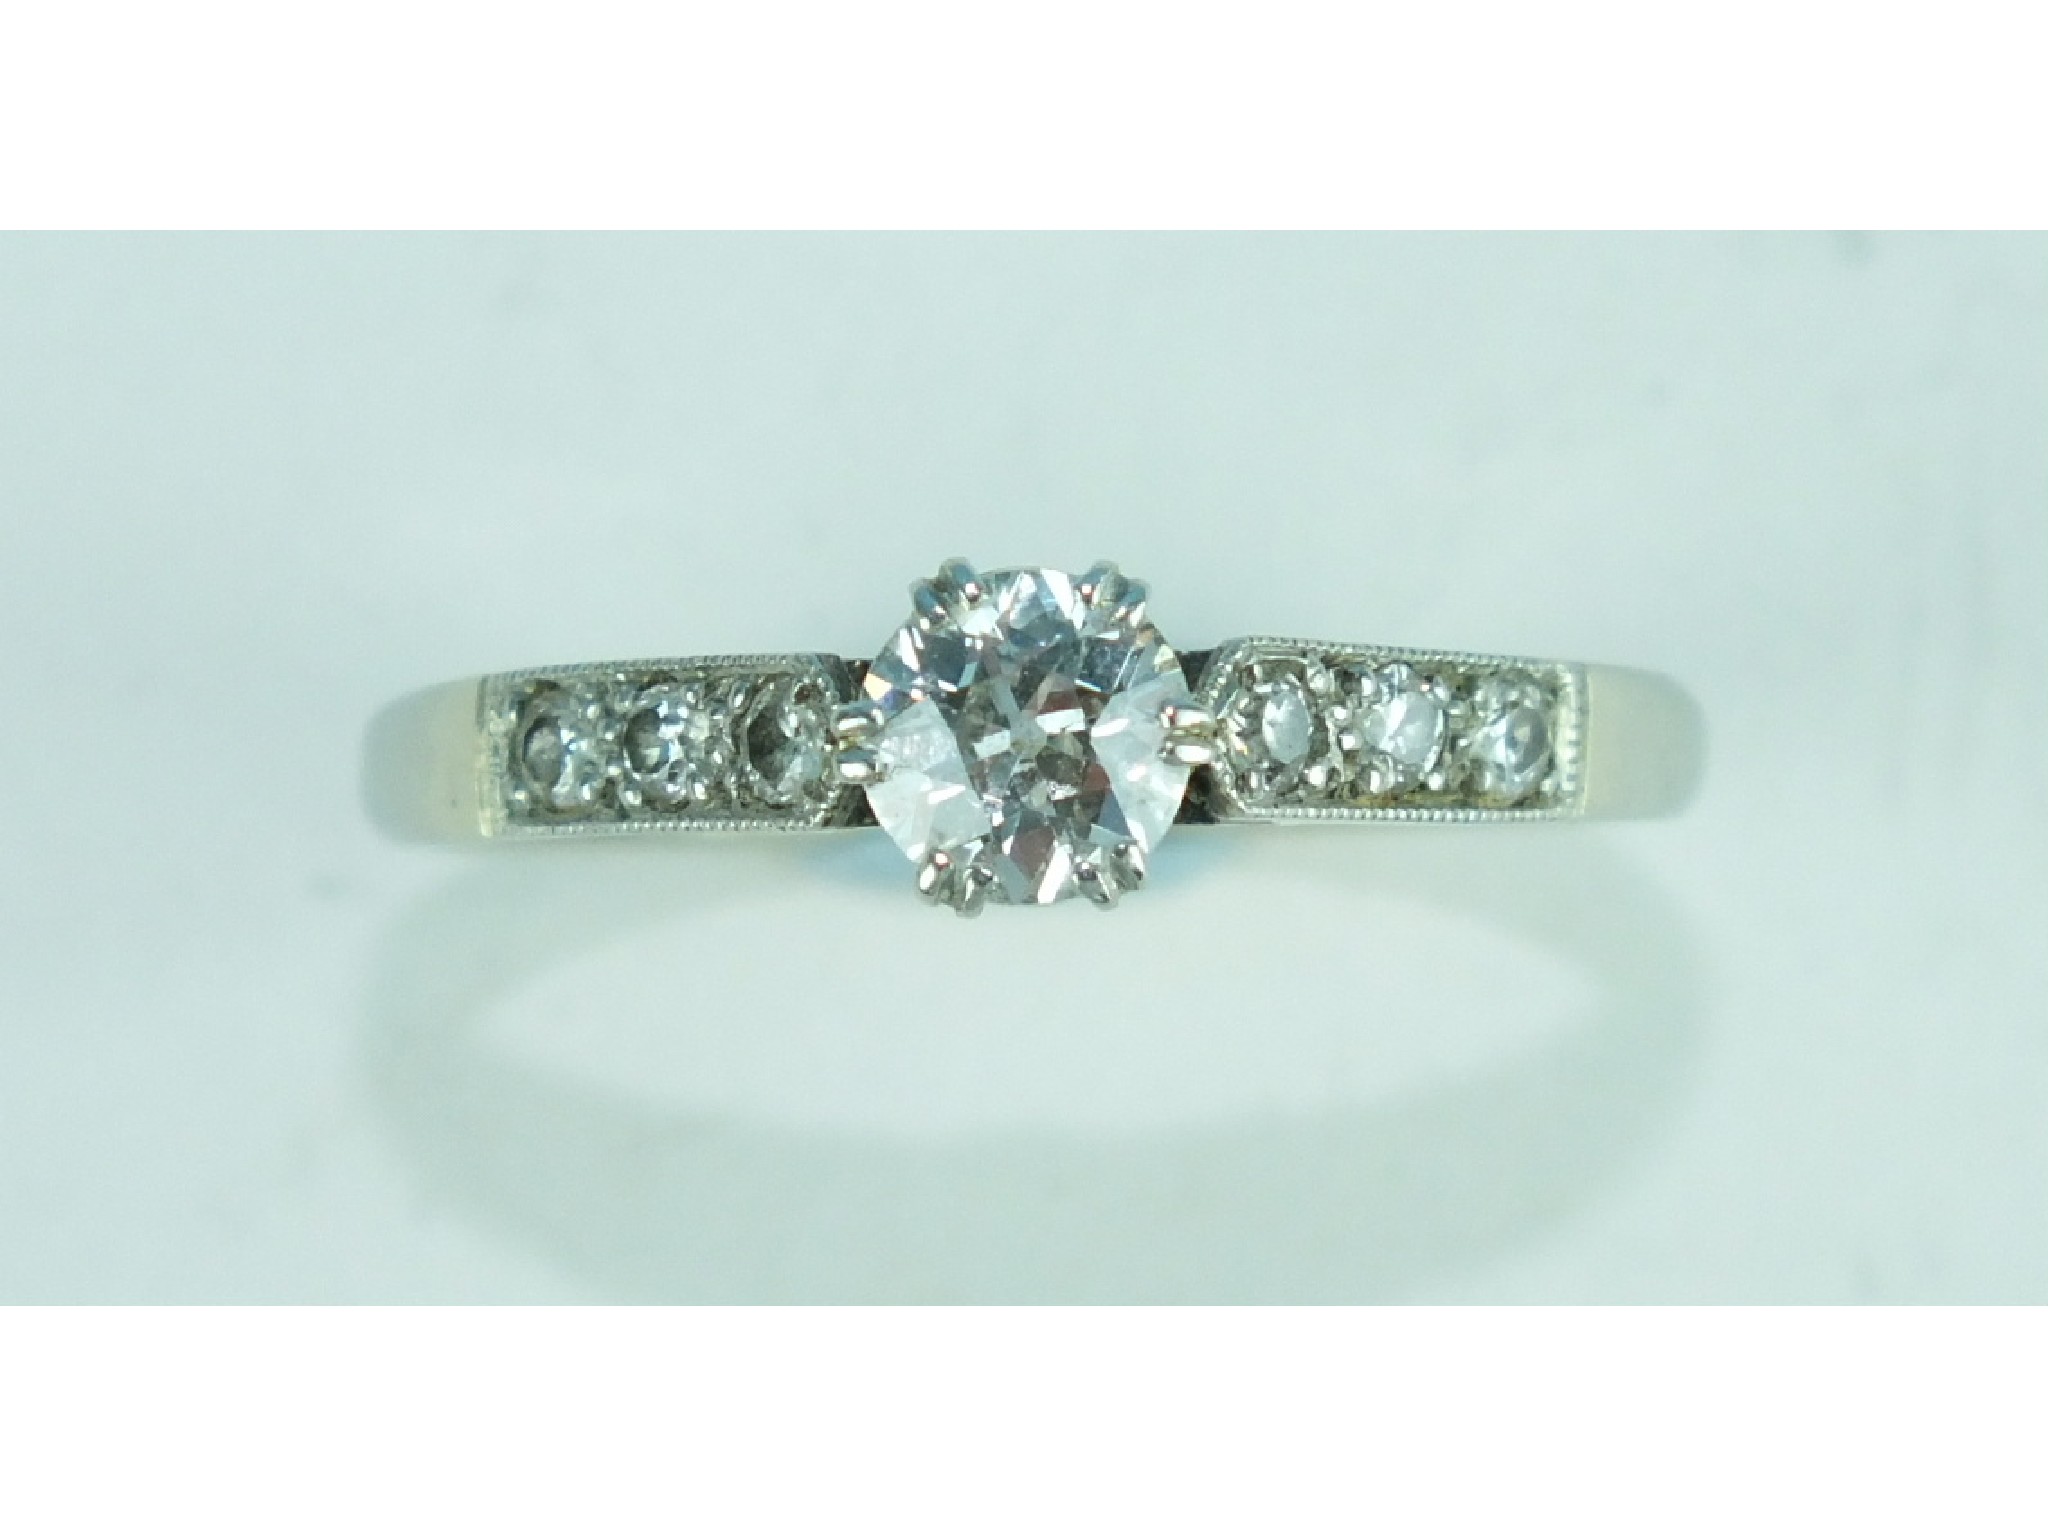 A solitaire diamond ring claw set a brilliant cut diamond of approximately 0.45cts in 18ct white